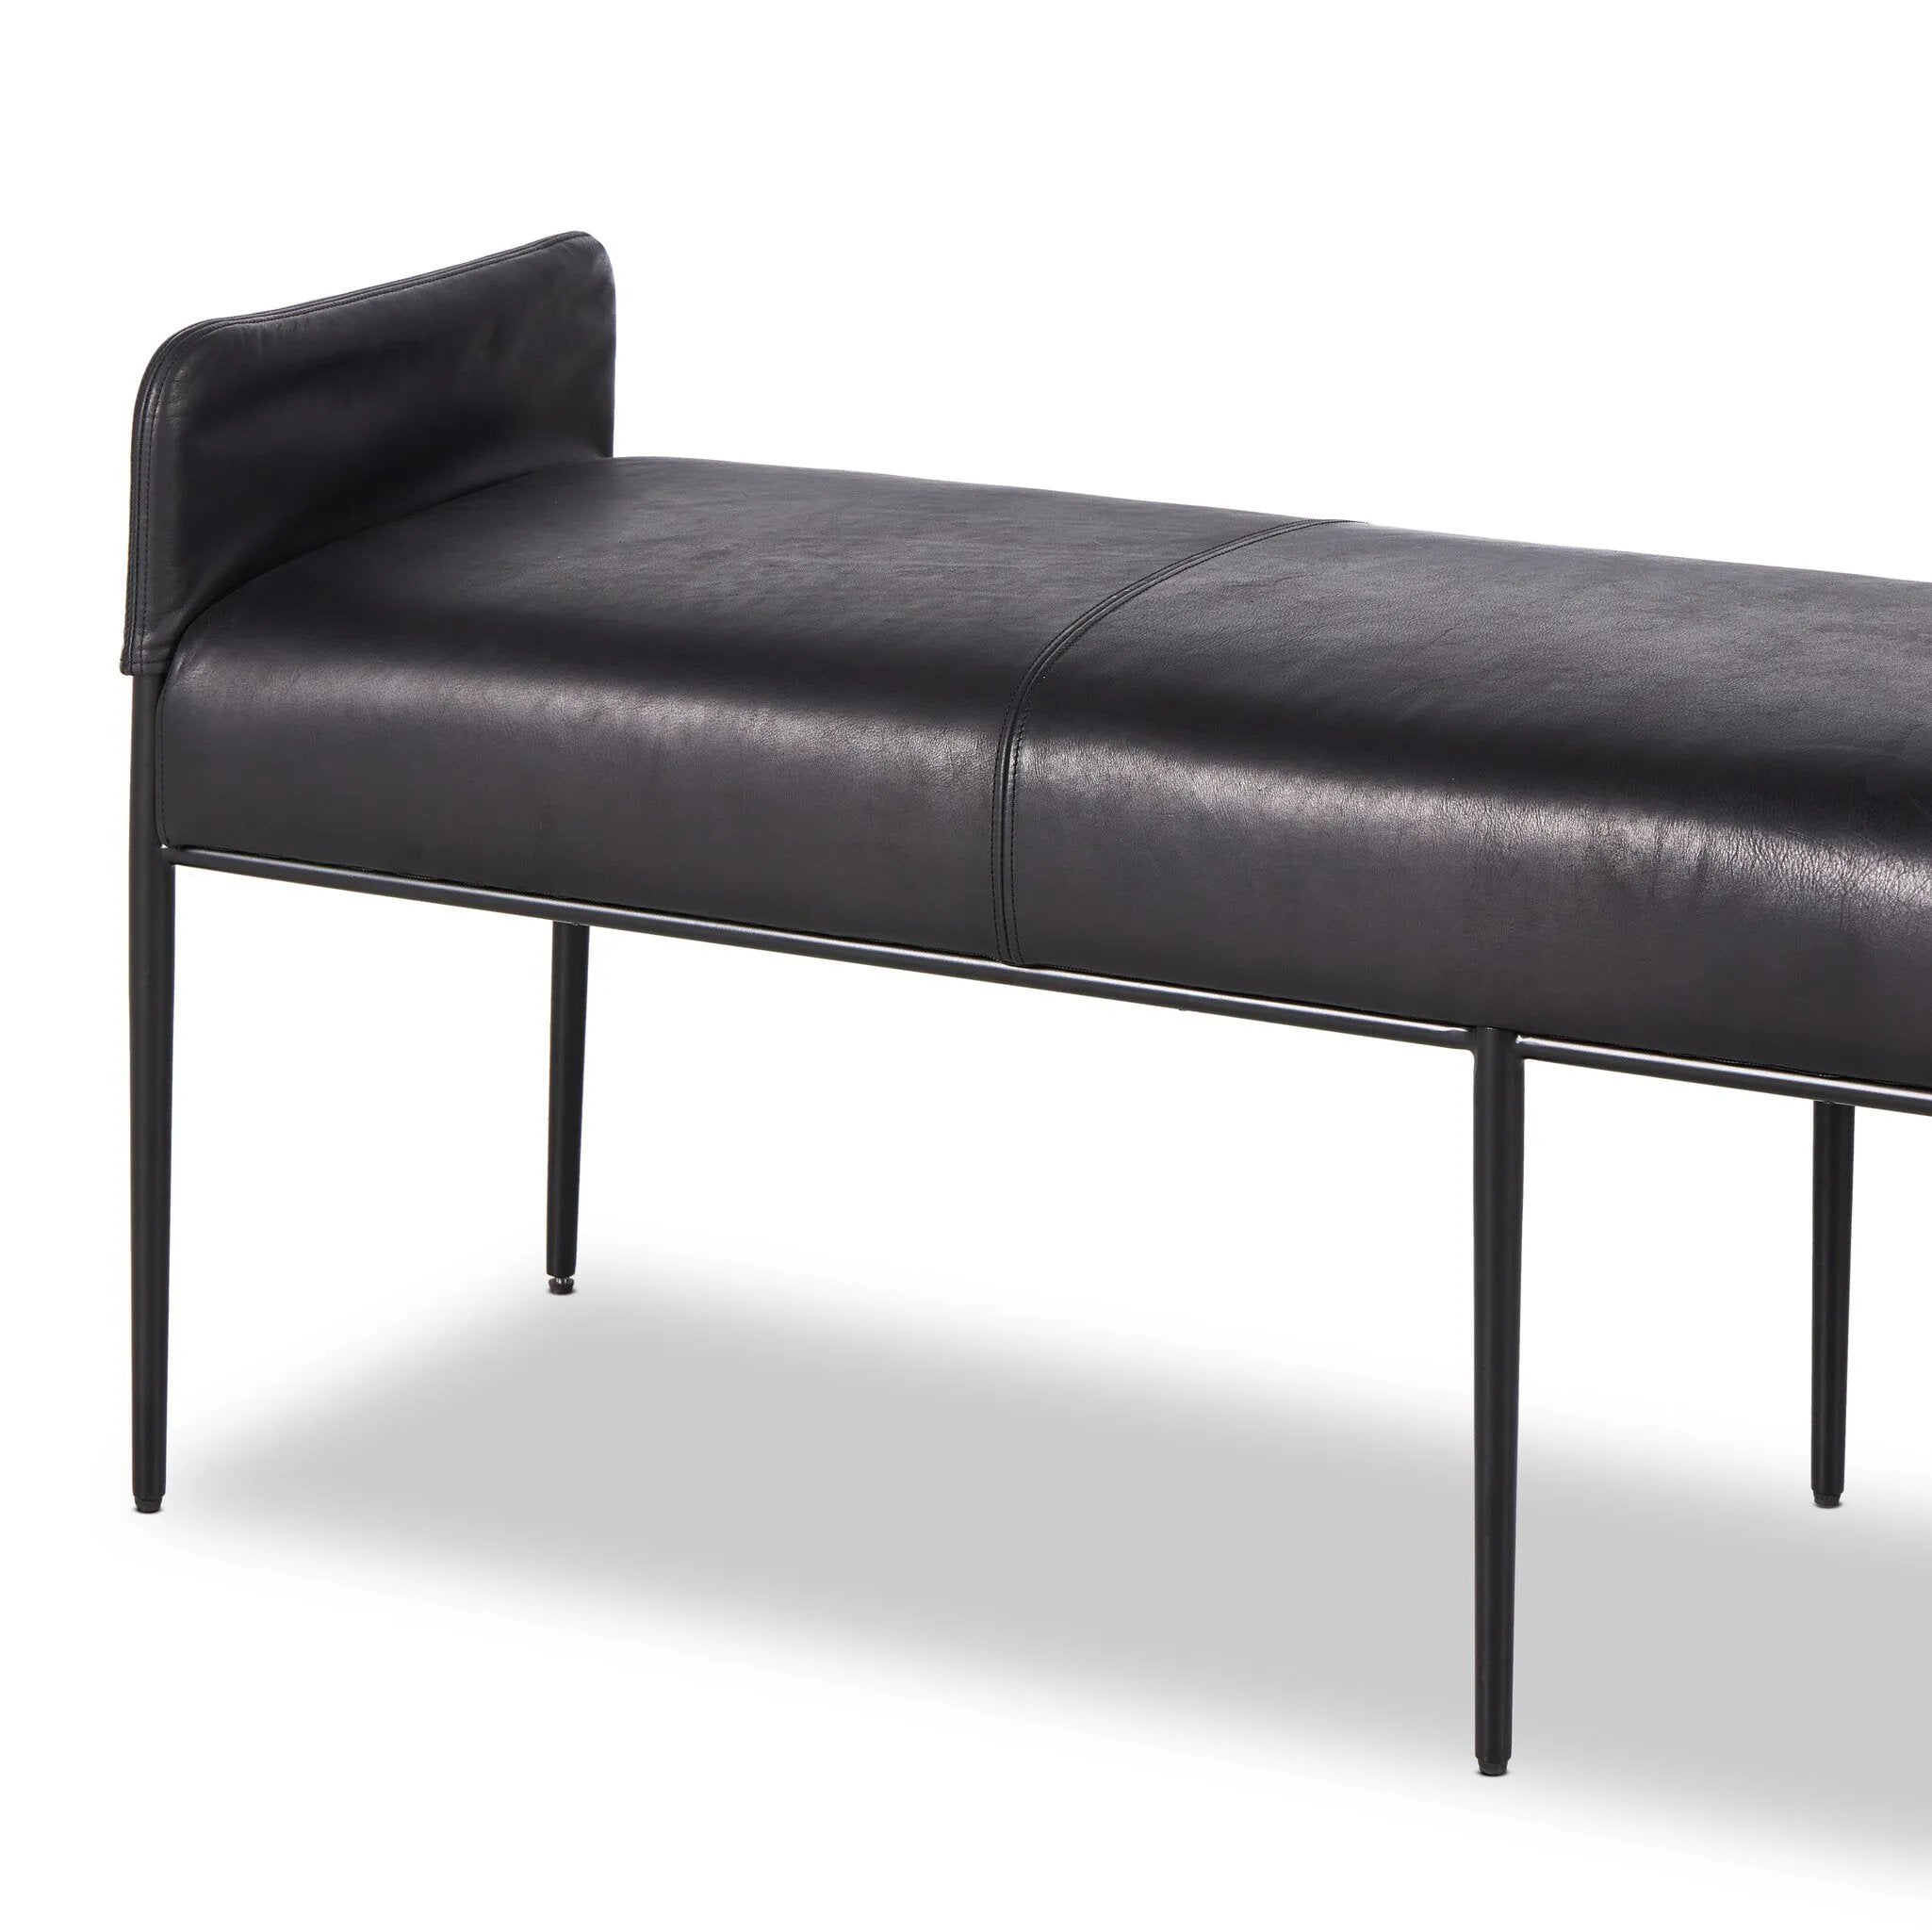 Black top-grain leather steals the show in this sleek, simple bench. Sourced from one of the oldest family-owned tanneries in Italy's Bassano del Grappa, heirloom leather is salvaged and processed from upcycled hides featuring an abundance of natural markings, scars and color variations. Amethyst Home provides interior design, new home construction design consulting, vintage area rugs, and lighting in the Salt Lake City metro area.